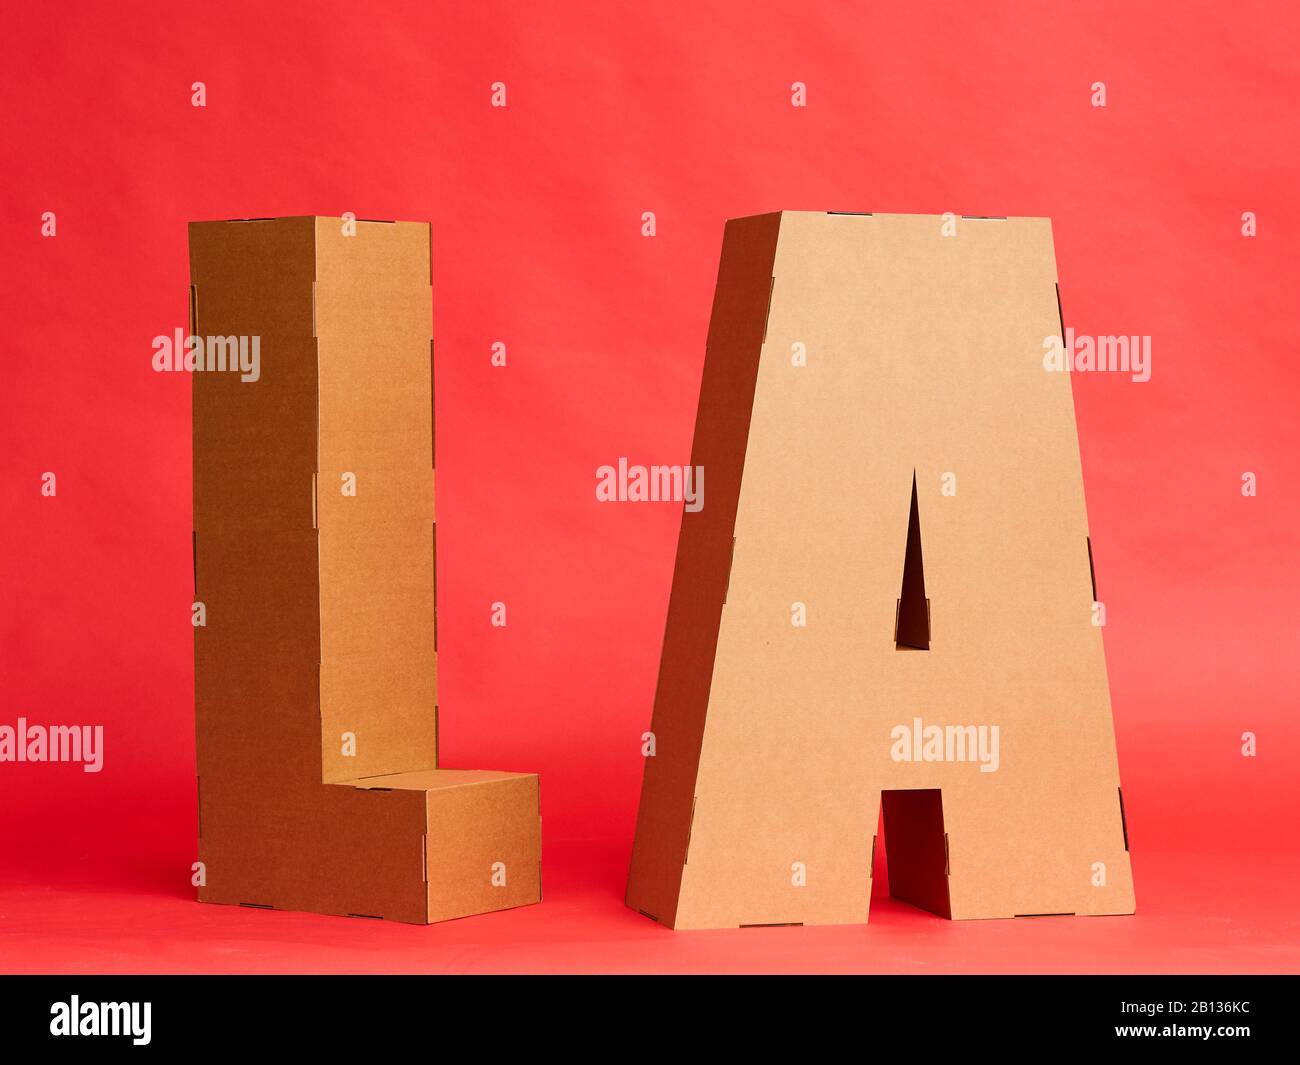 Large Recycled Cardboard Letters 